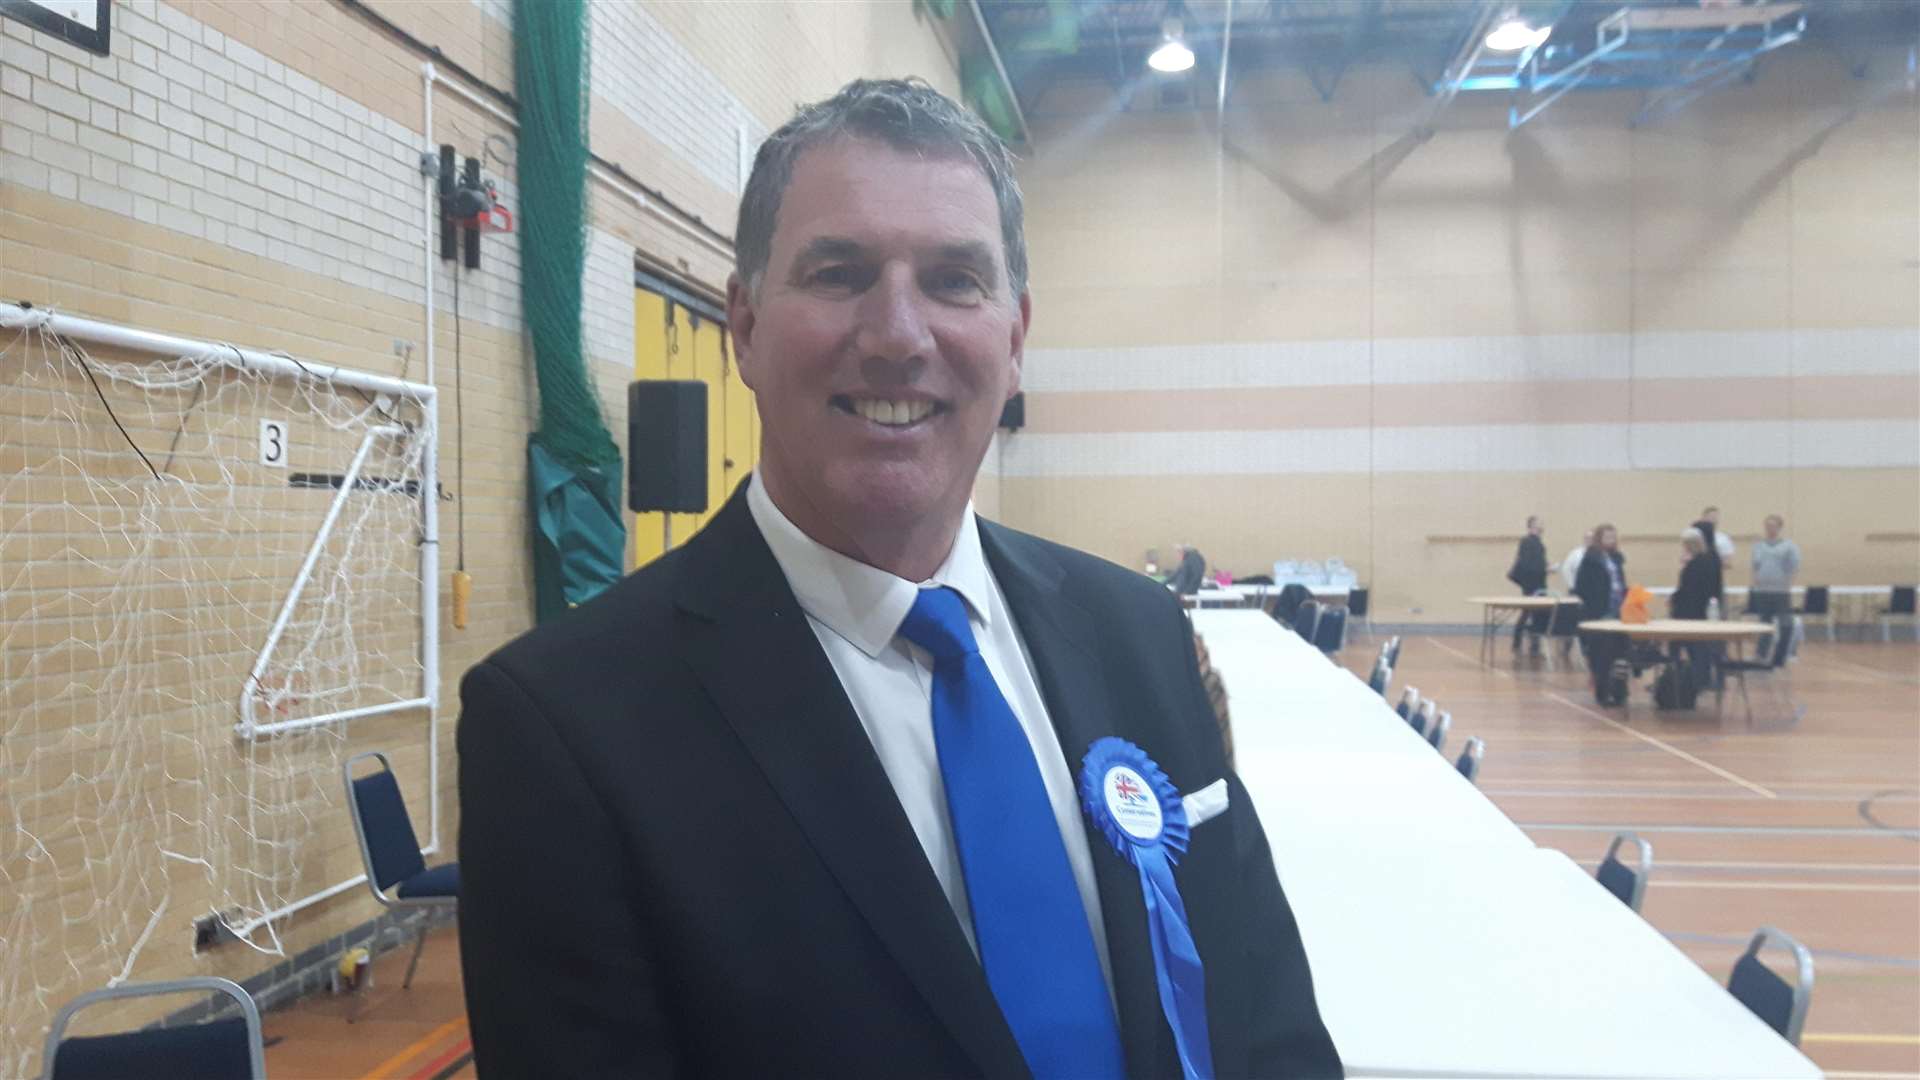 Cllr Mike Whiting